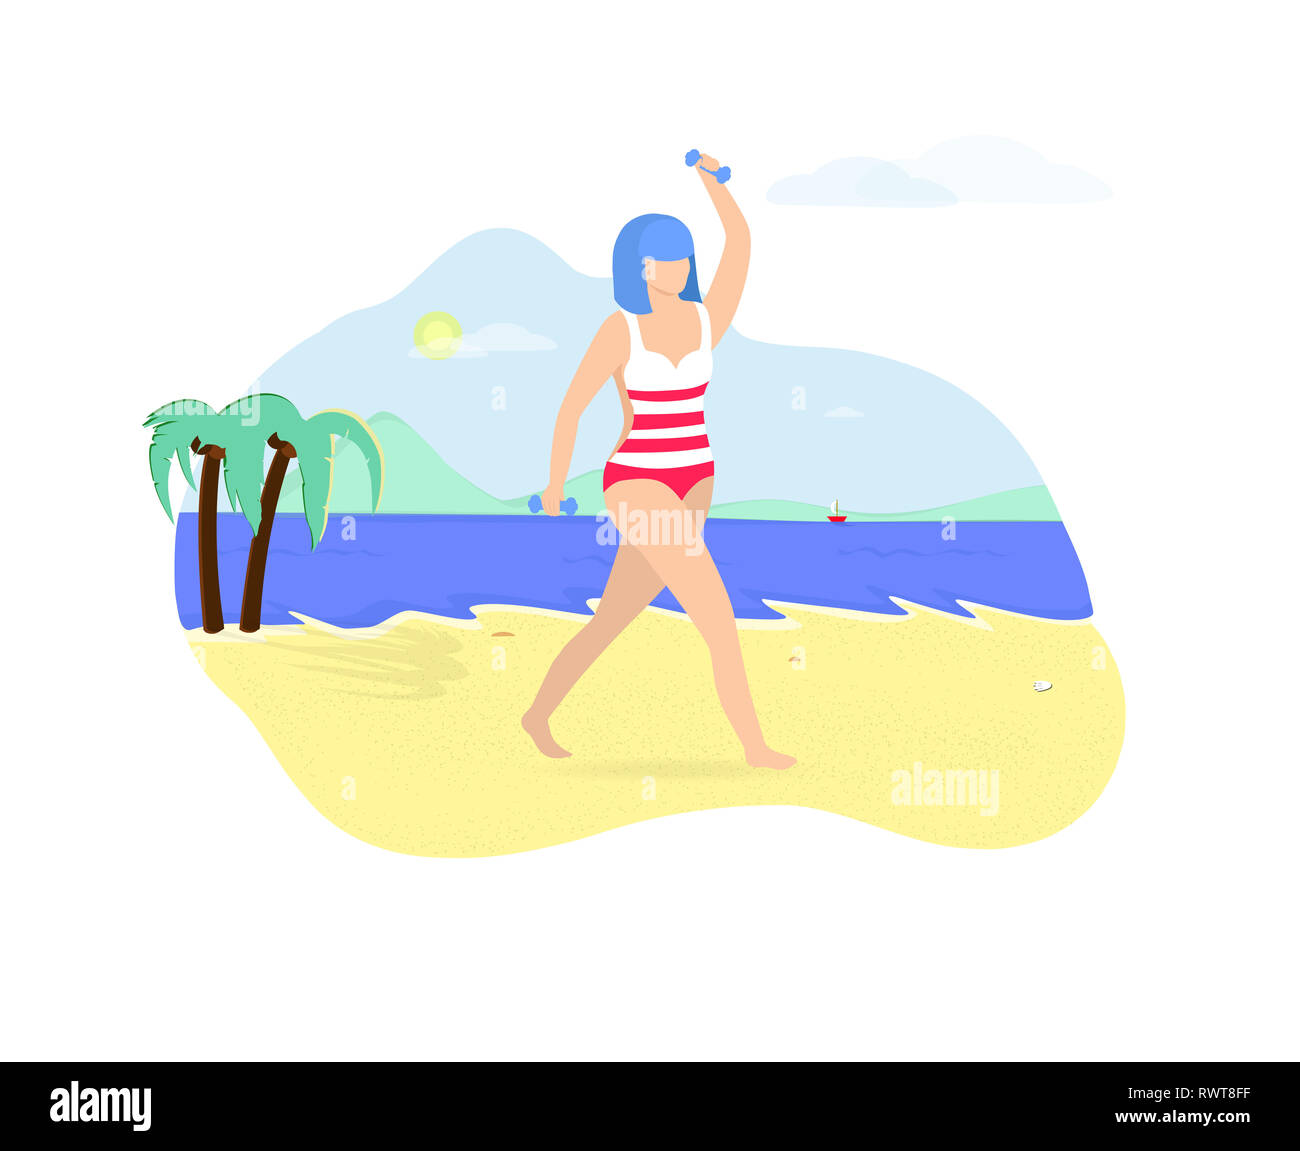 Young Beautiful Girl with Blue Hair Exercising with Dumbbells on Beach. Plus Size Woman in Striped Swimsuit. Body Positive, Sport, Healthy Lifestyle.  Stock Photo